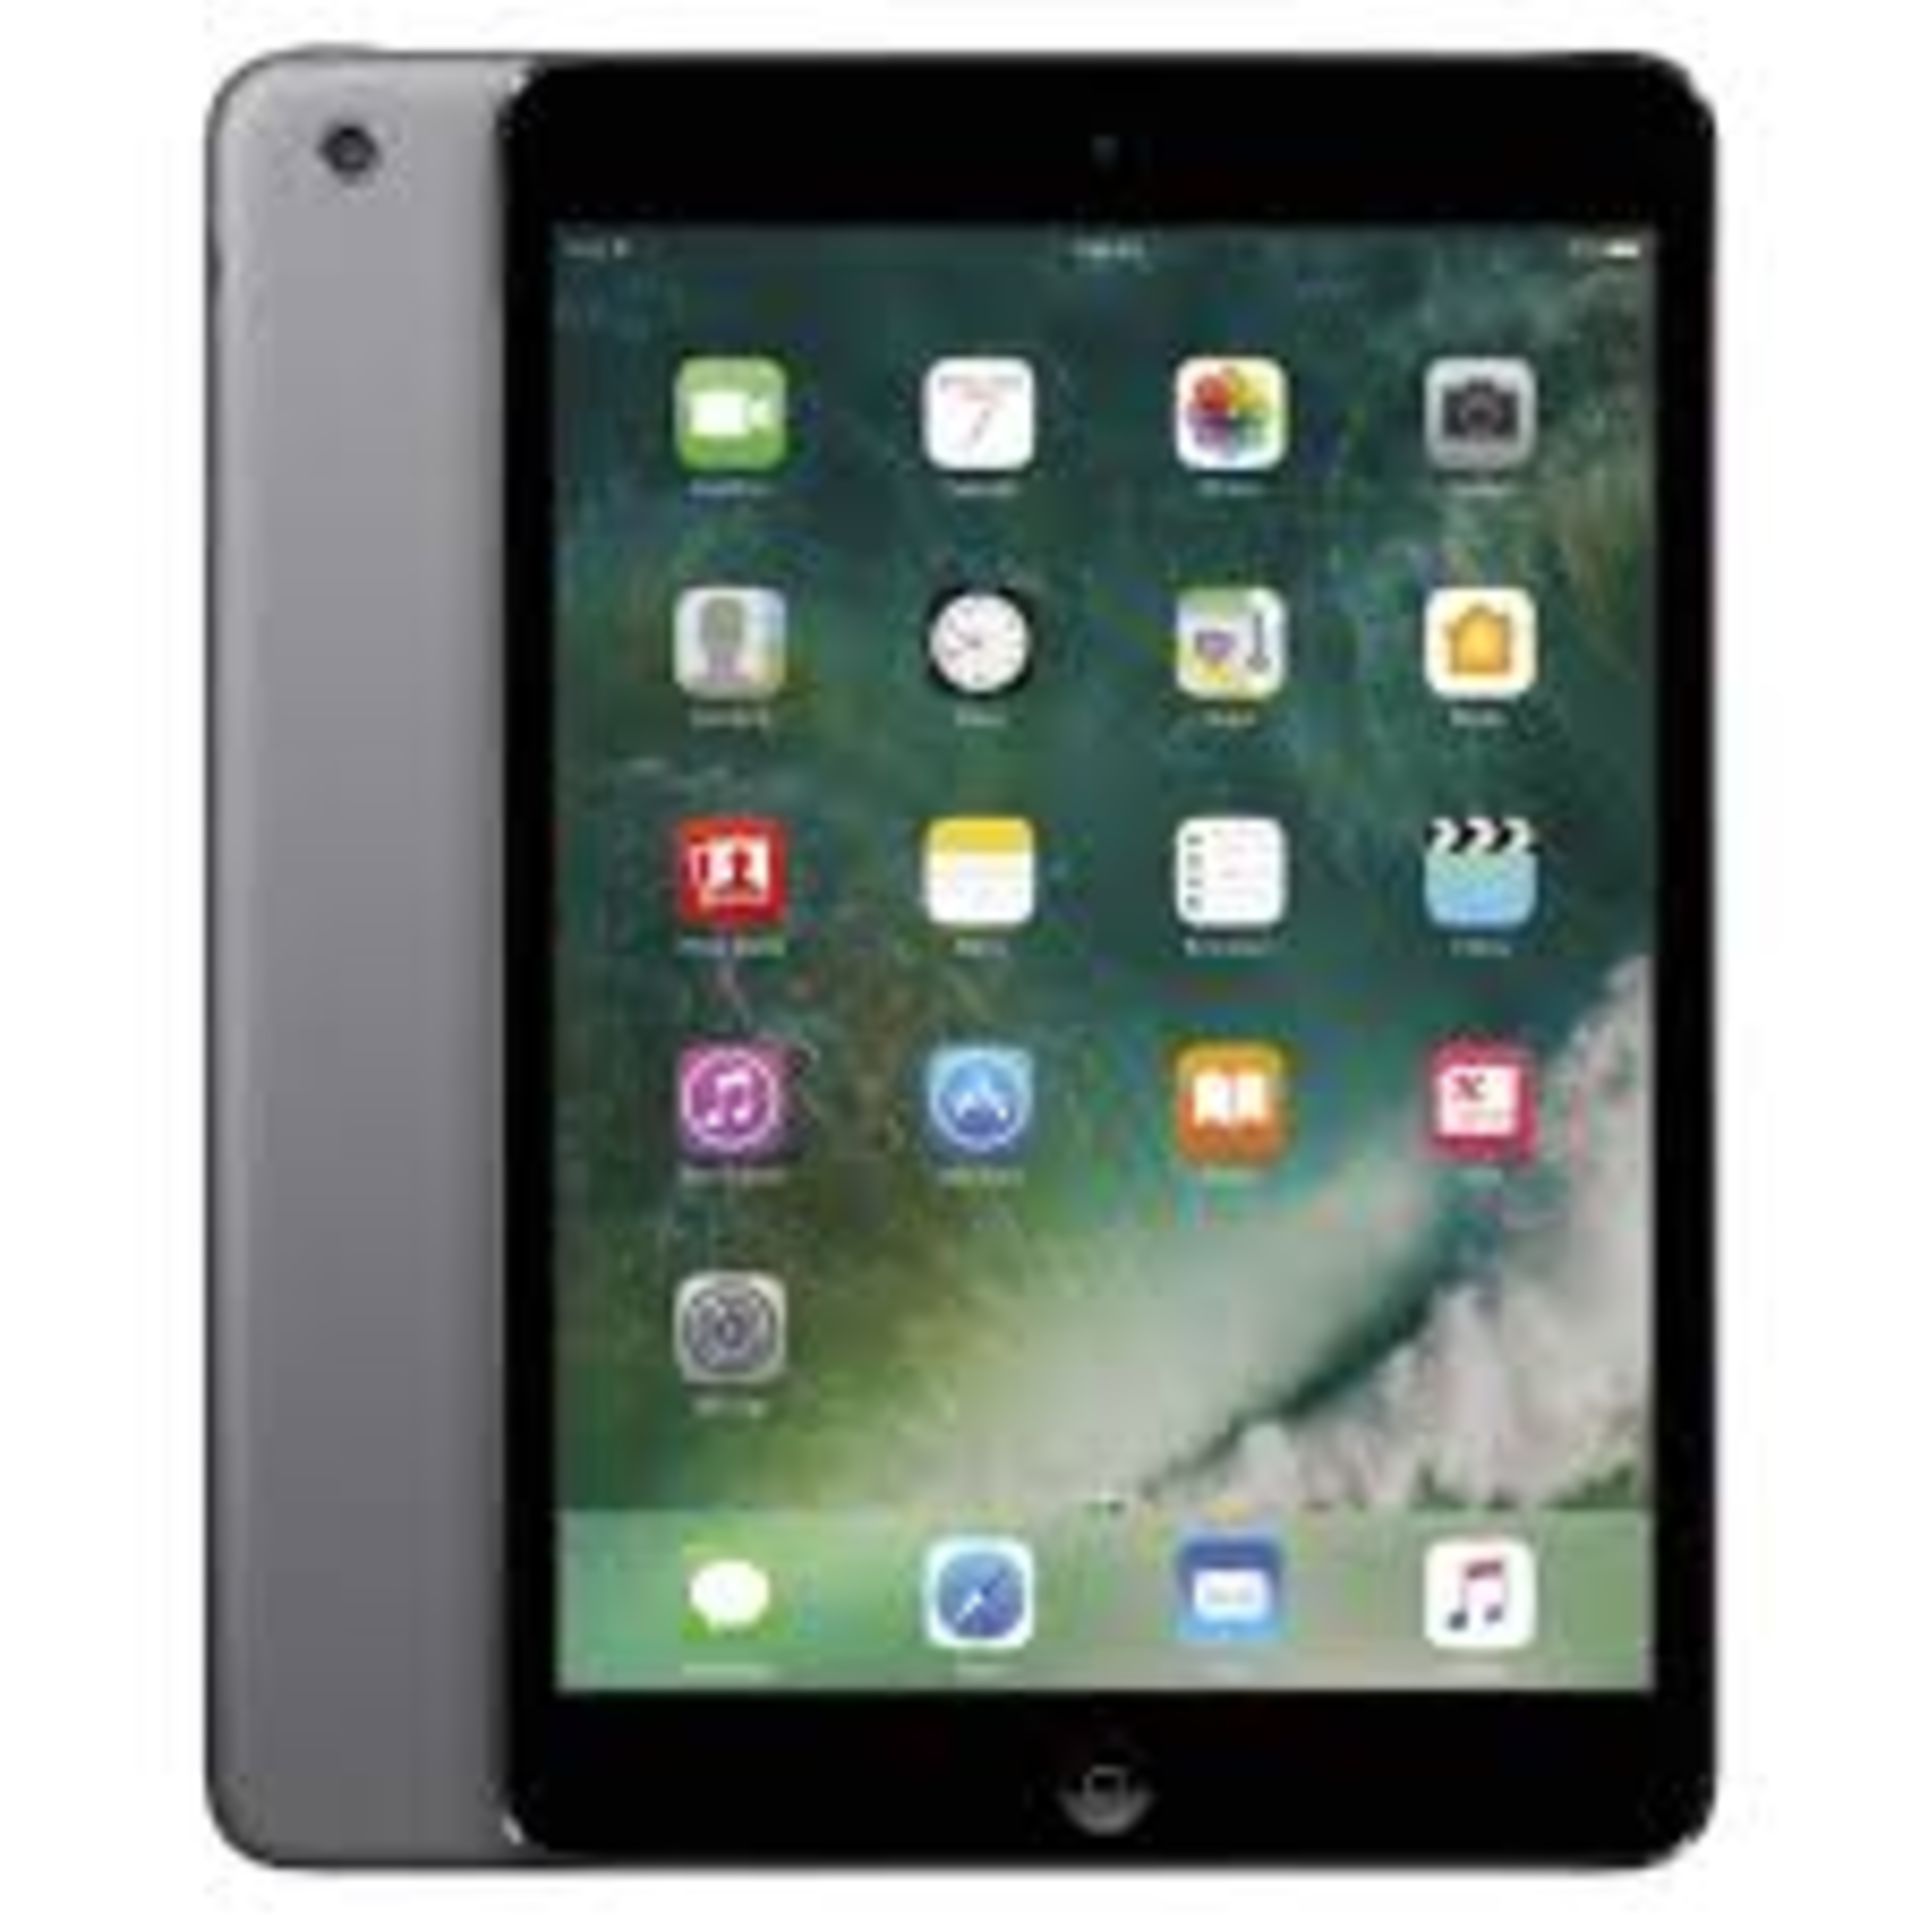 V Grade B Apple iPad Mini 2 16GB Space Grey - with box and accessories X 2 YOUR BID PRICE TO BE